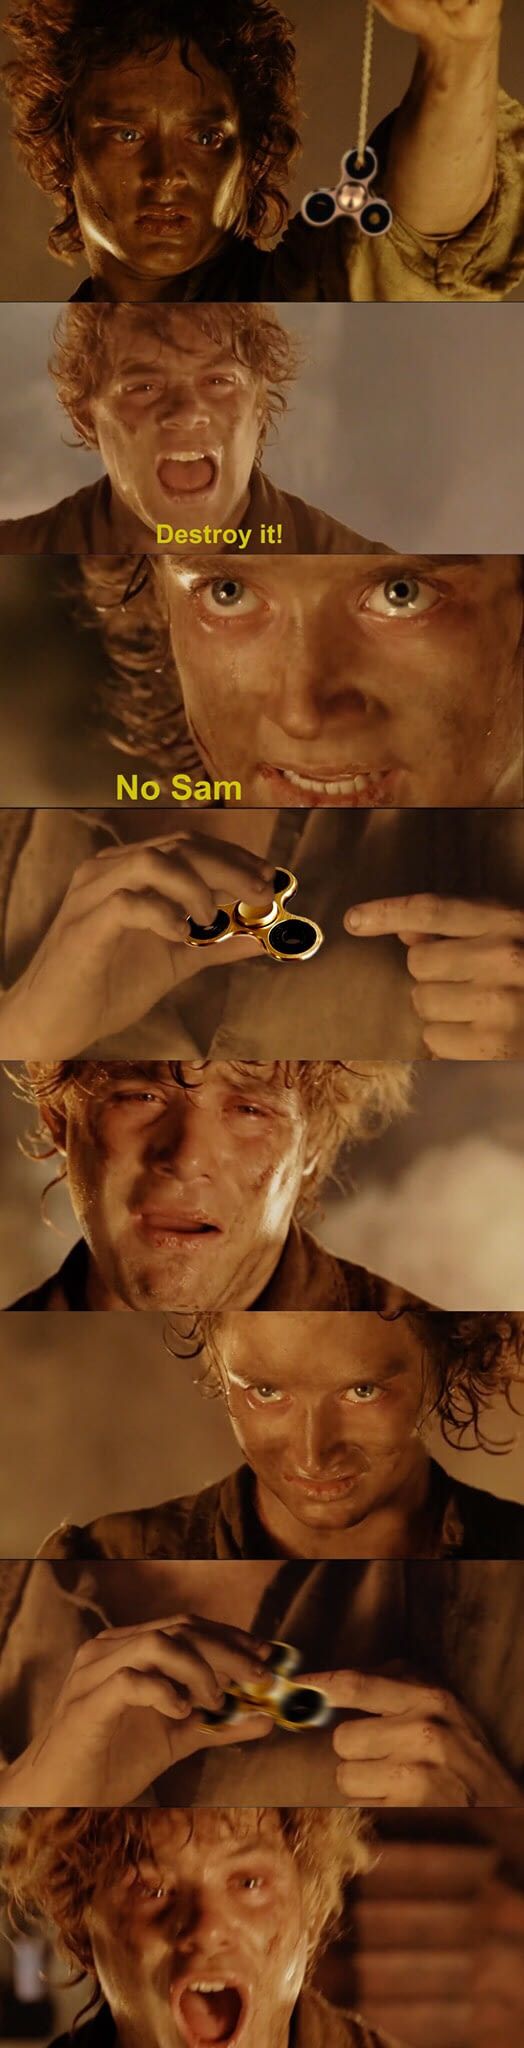 Don't do that Frodo!